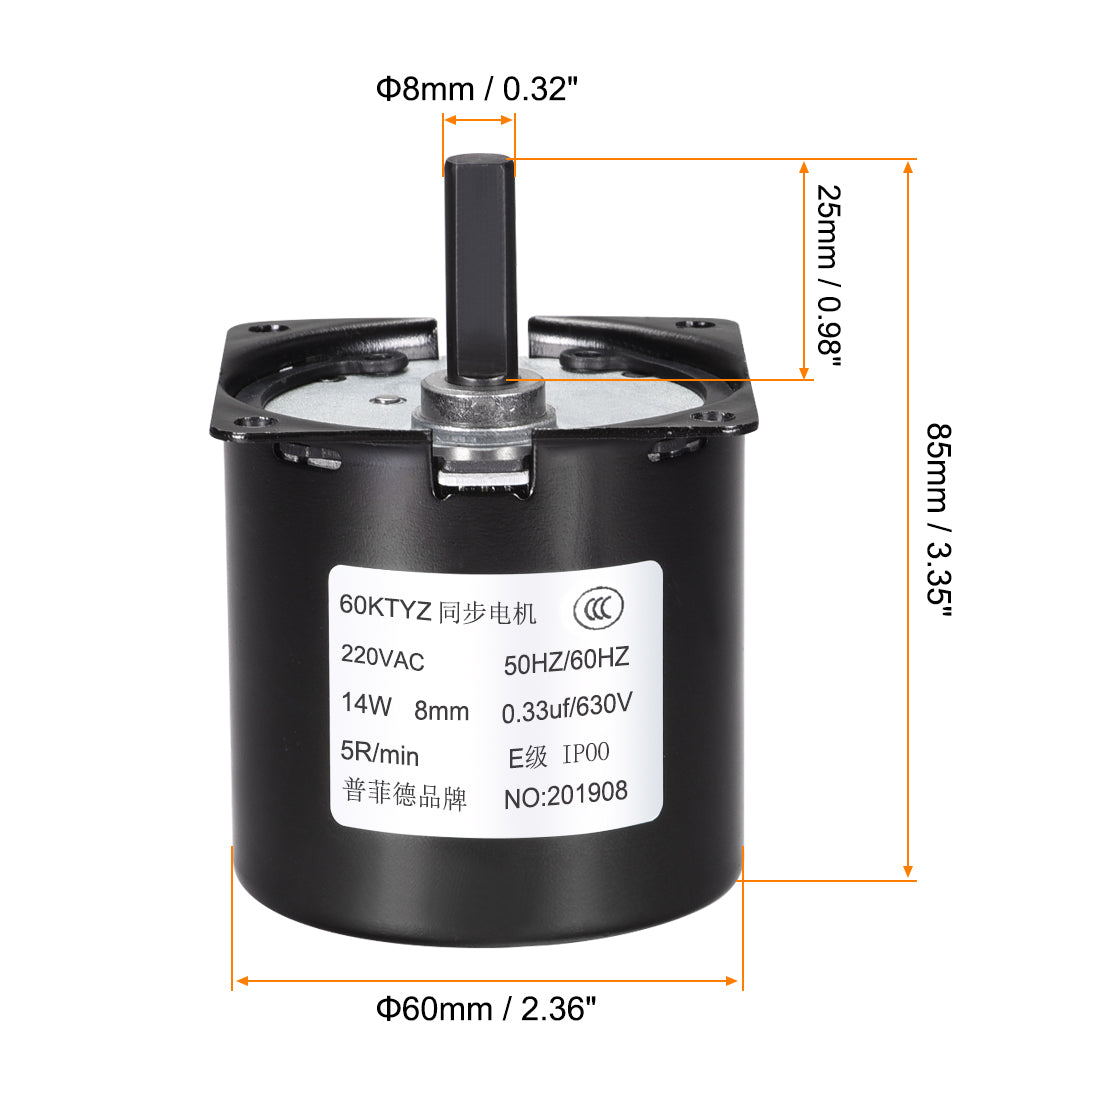 uxcell Uxcell AC 220V Electric Synchronous Motor Metal Gear Turntable /C 5RPM 50-60HZ 14W 8mm Dia Eccentric Shaft